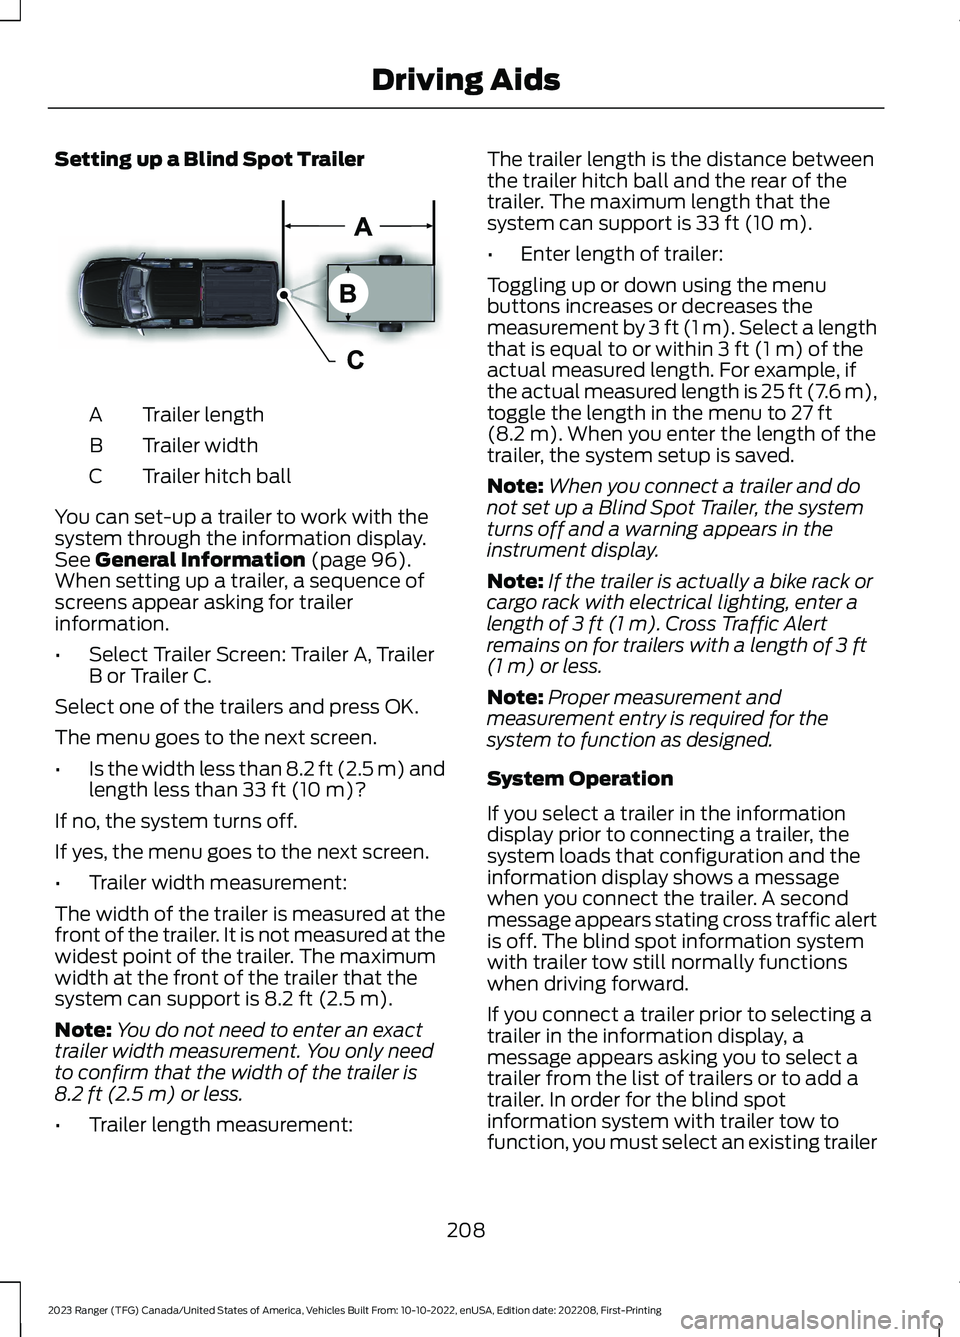 FORD RANGER 2023  Owners Manual Setting up a Blind Spot Trailer
Trailer lengthA
Trailer widthB
Trailer hitch ballC
You can set-up a trailer to work with thesystem through the information display.See General Information (page 96).Whe